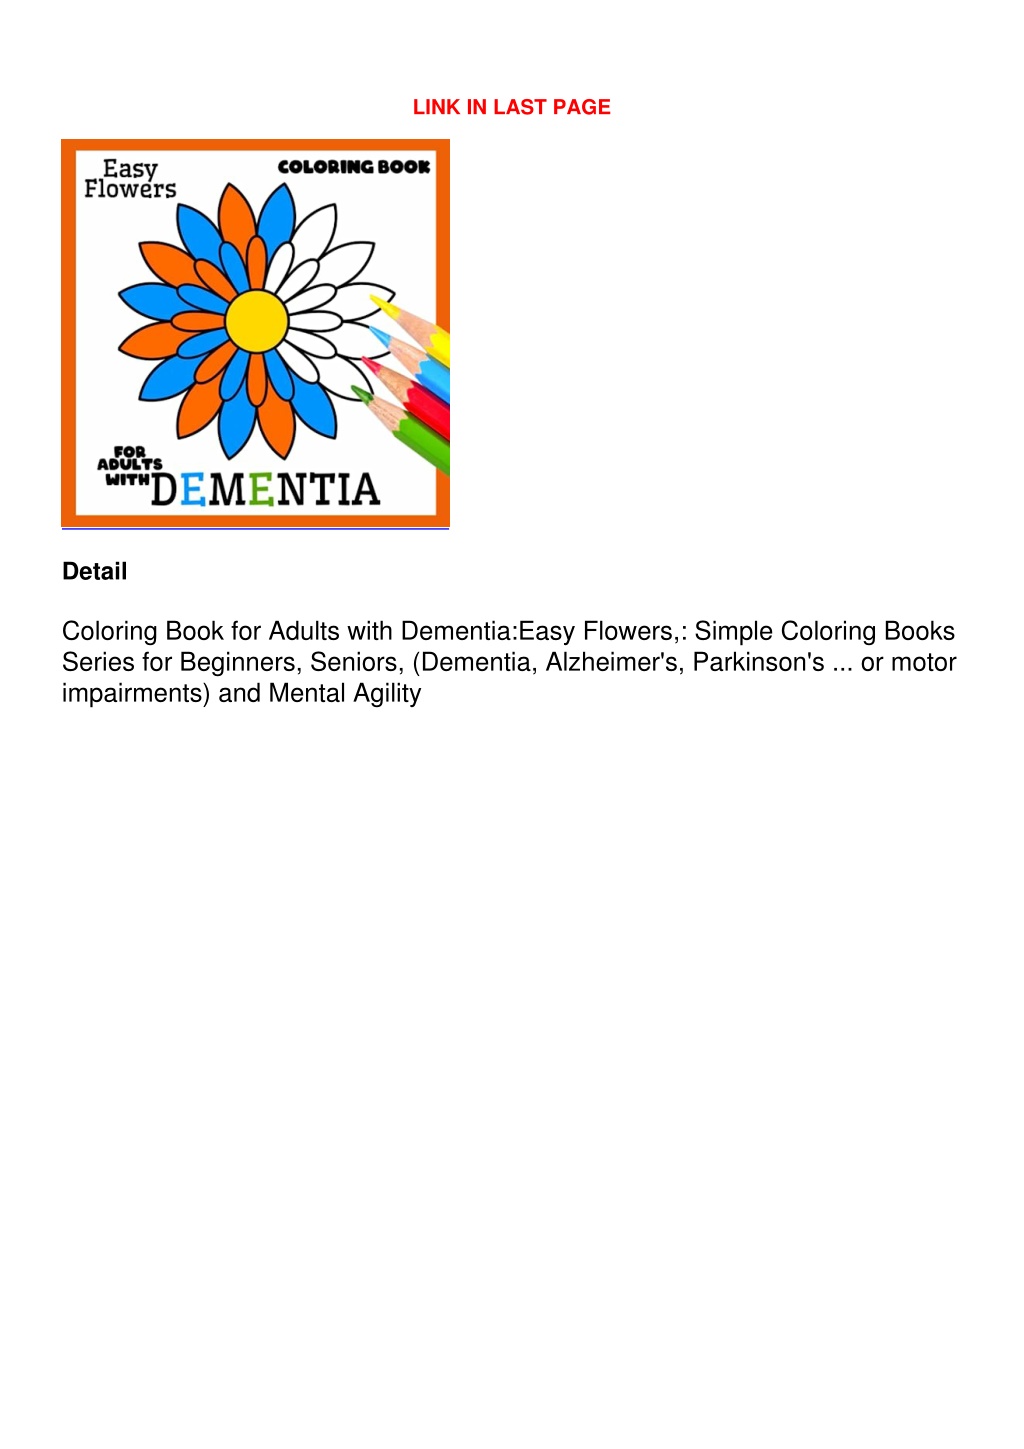 Coloring Book for Adults with Dementia:Hearts: Simple Coloring Books Series  for Beginners, Seniors,(Dementia, Alzheimer's disease, Parkinson's  or